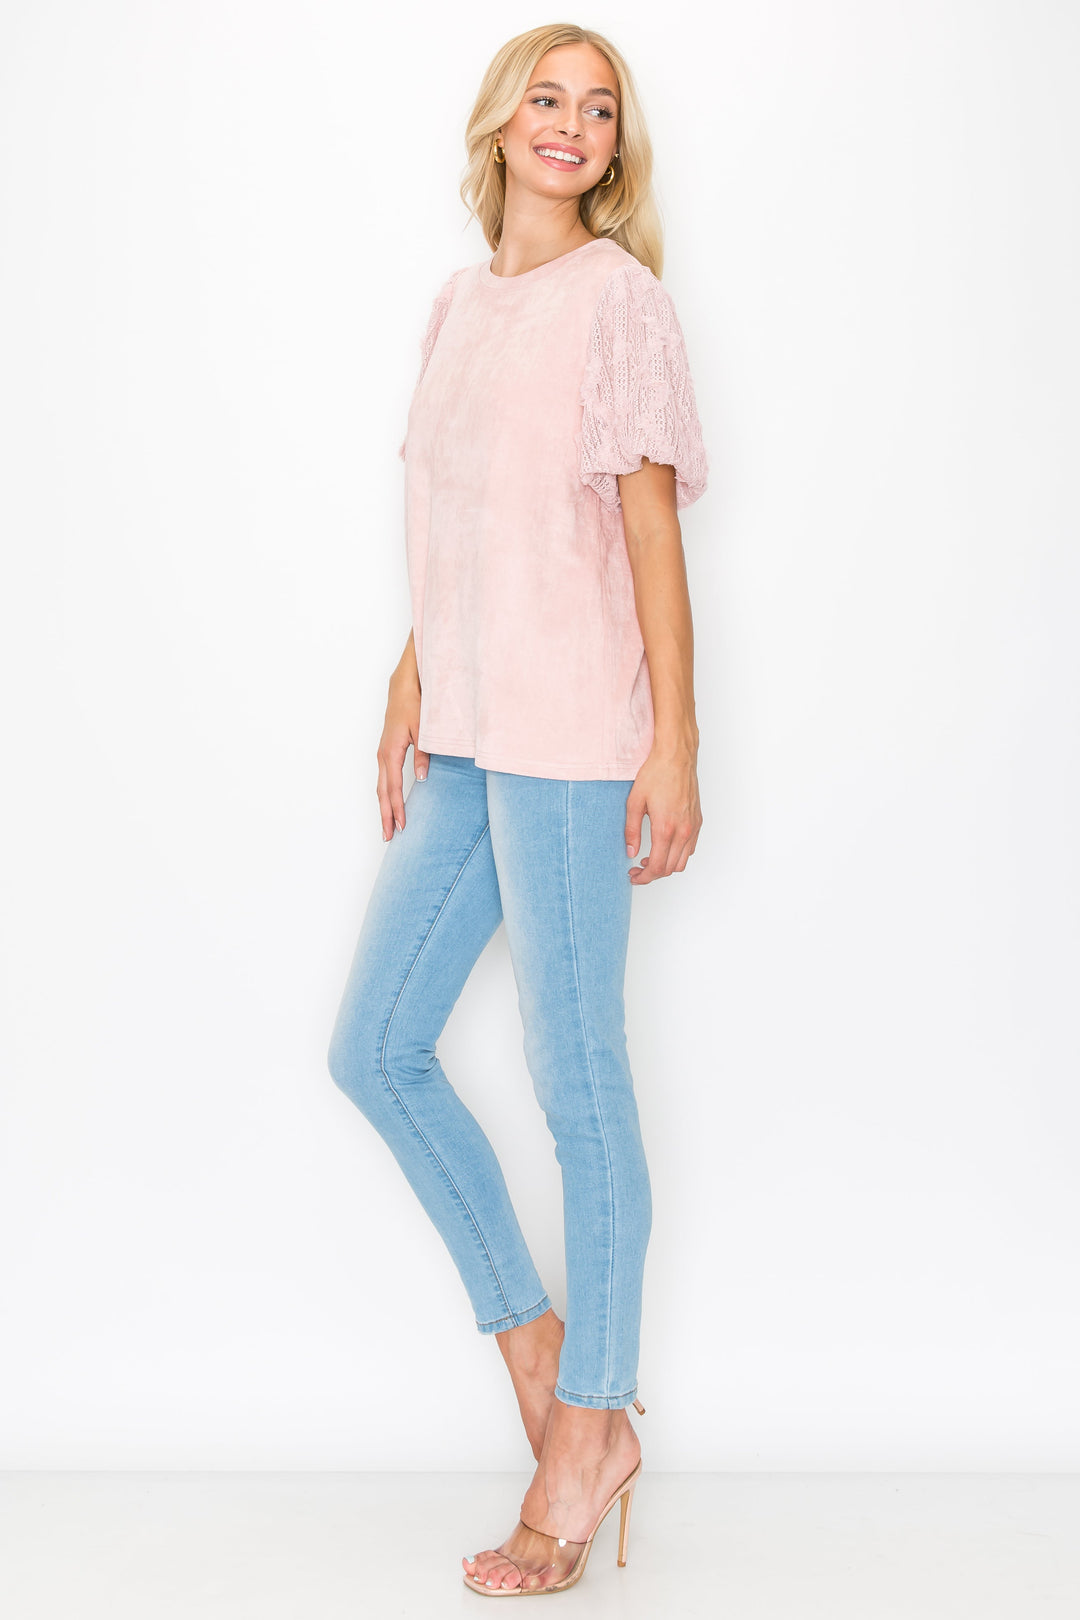 Adelle Stretch Suede Top with Lace